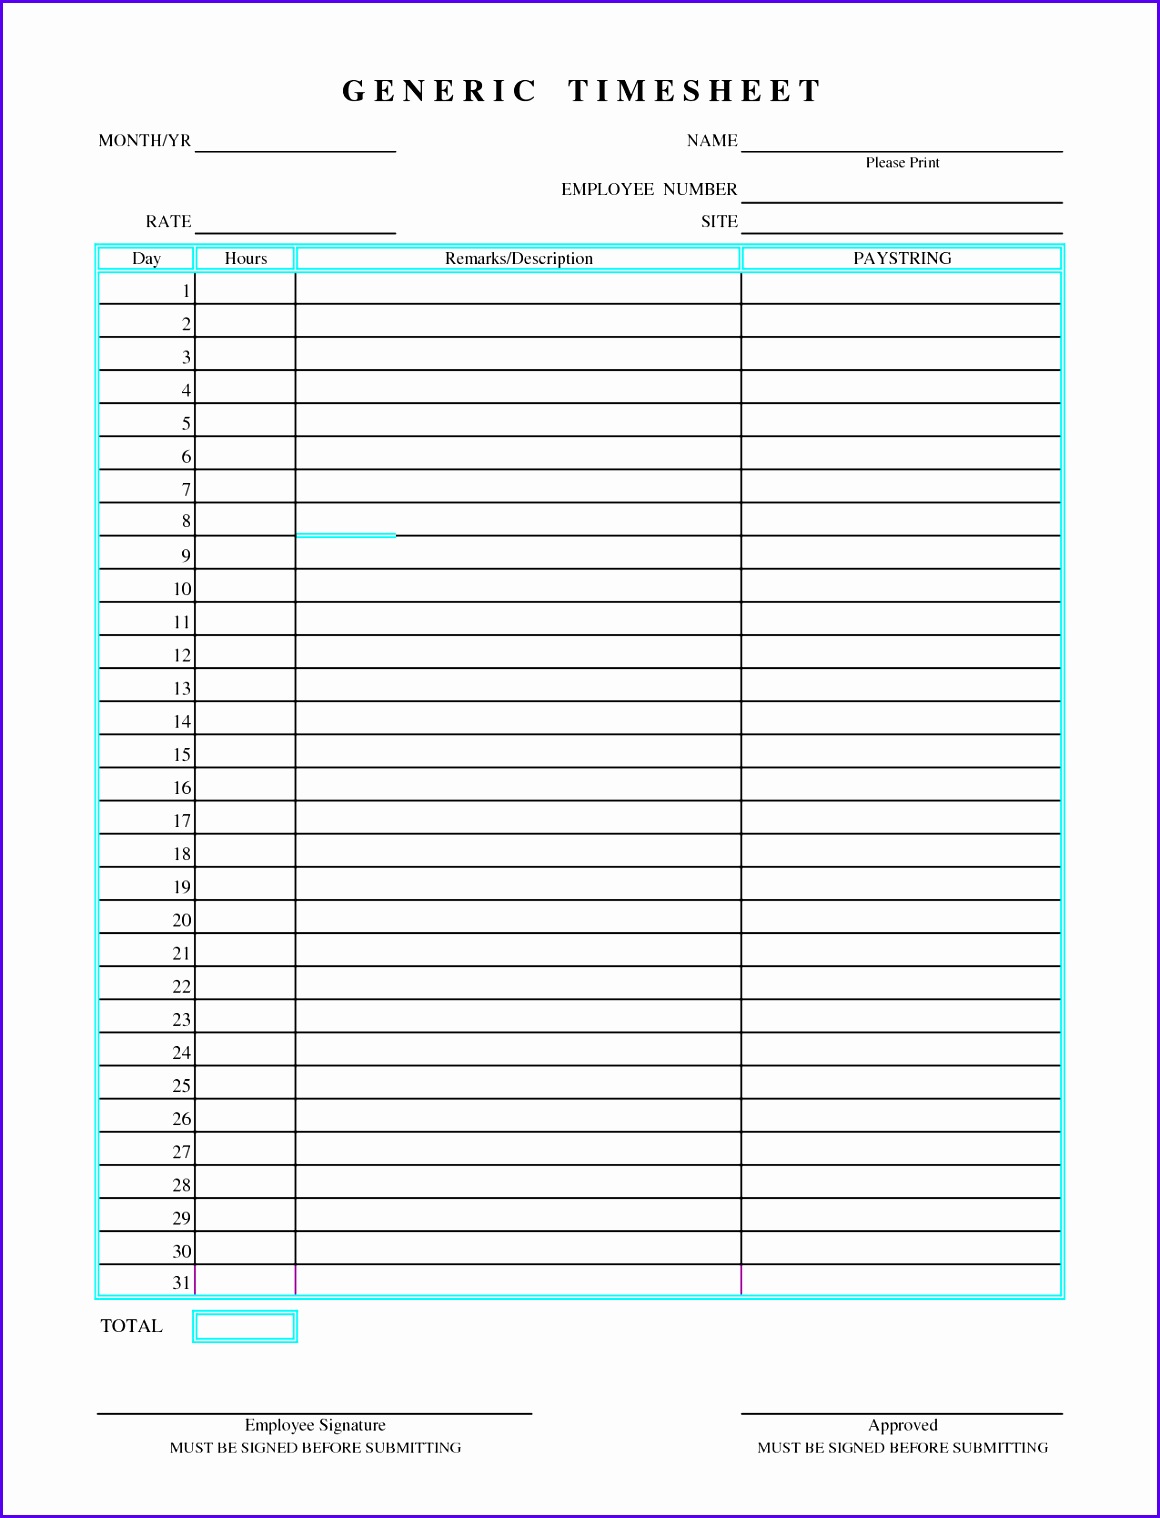 Monthly Timesheet Template Excel Excel Time Clock Template Free Excel Time Study Template Employee Tracking Excel